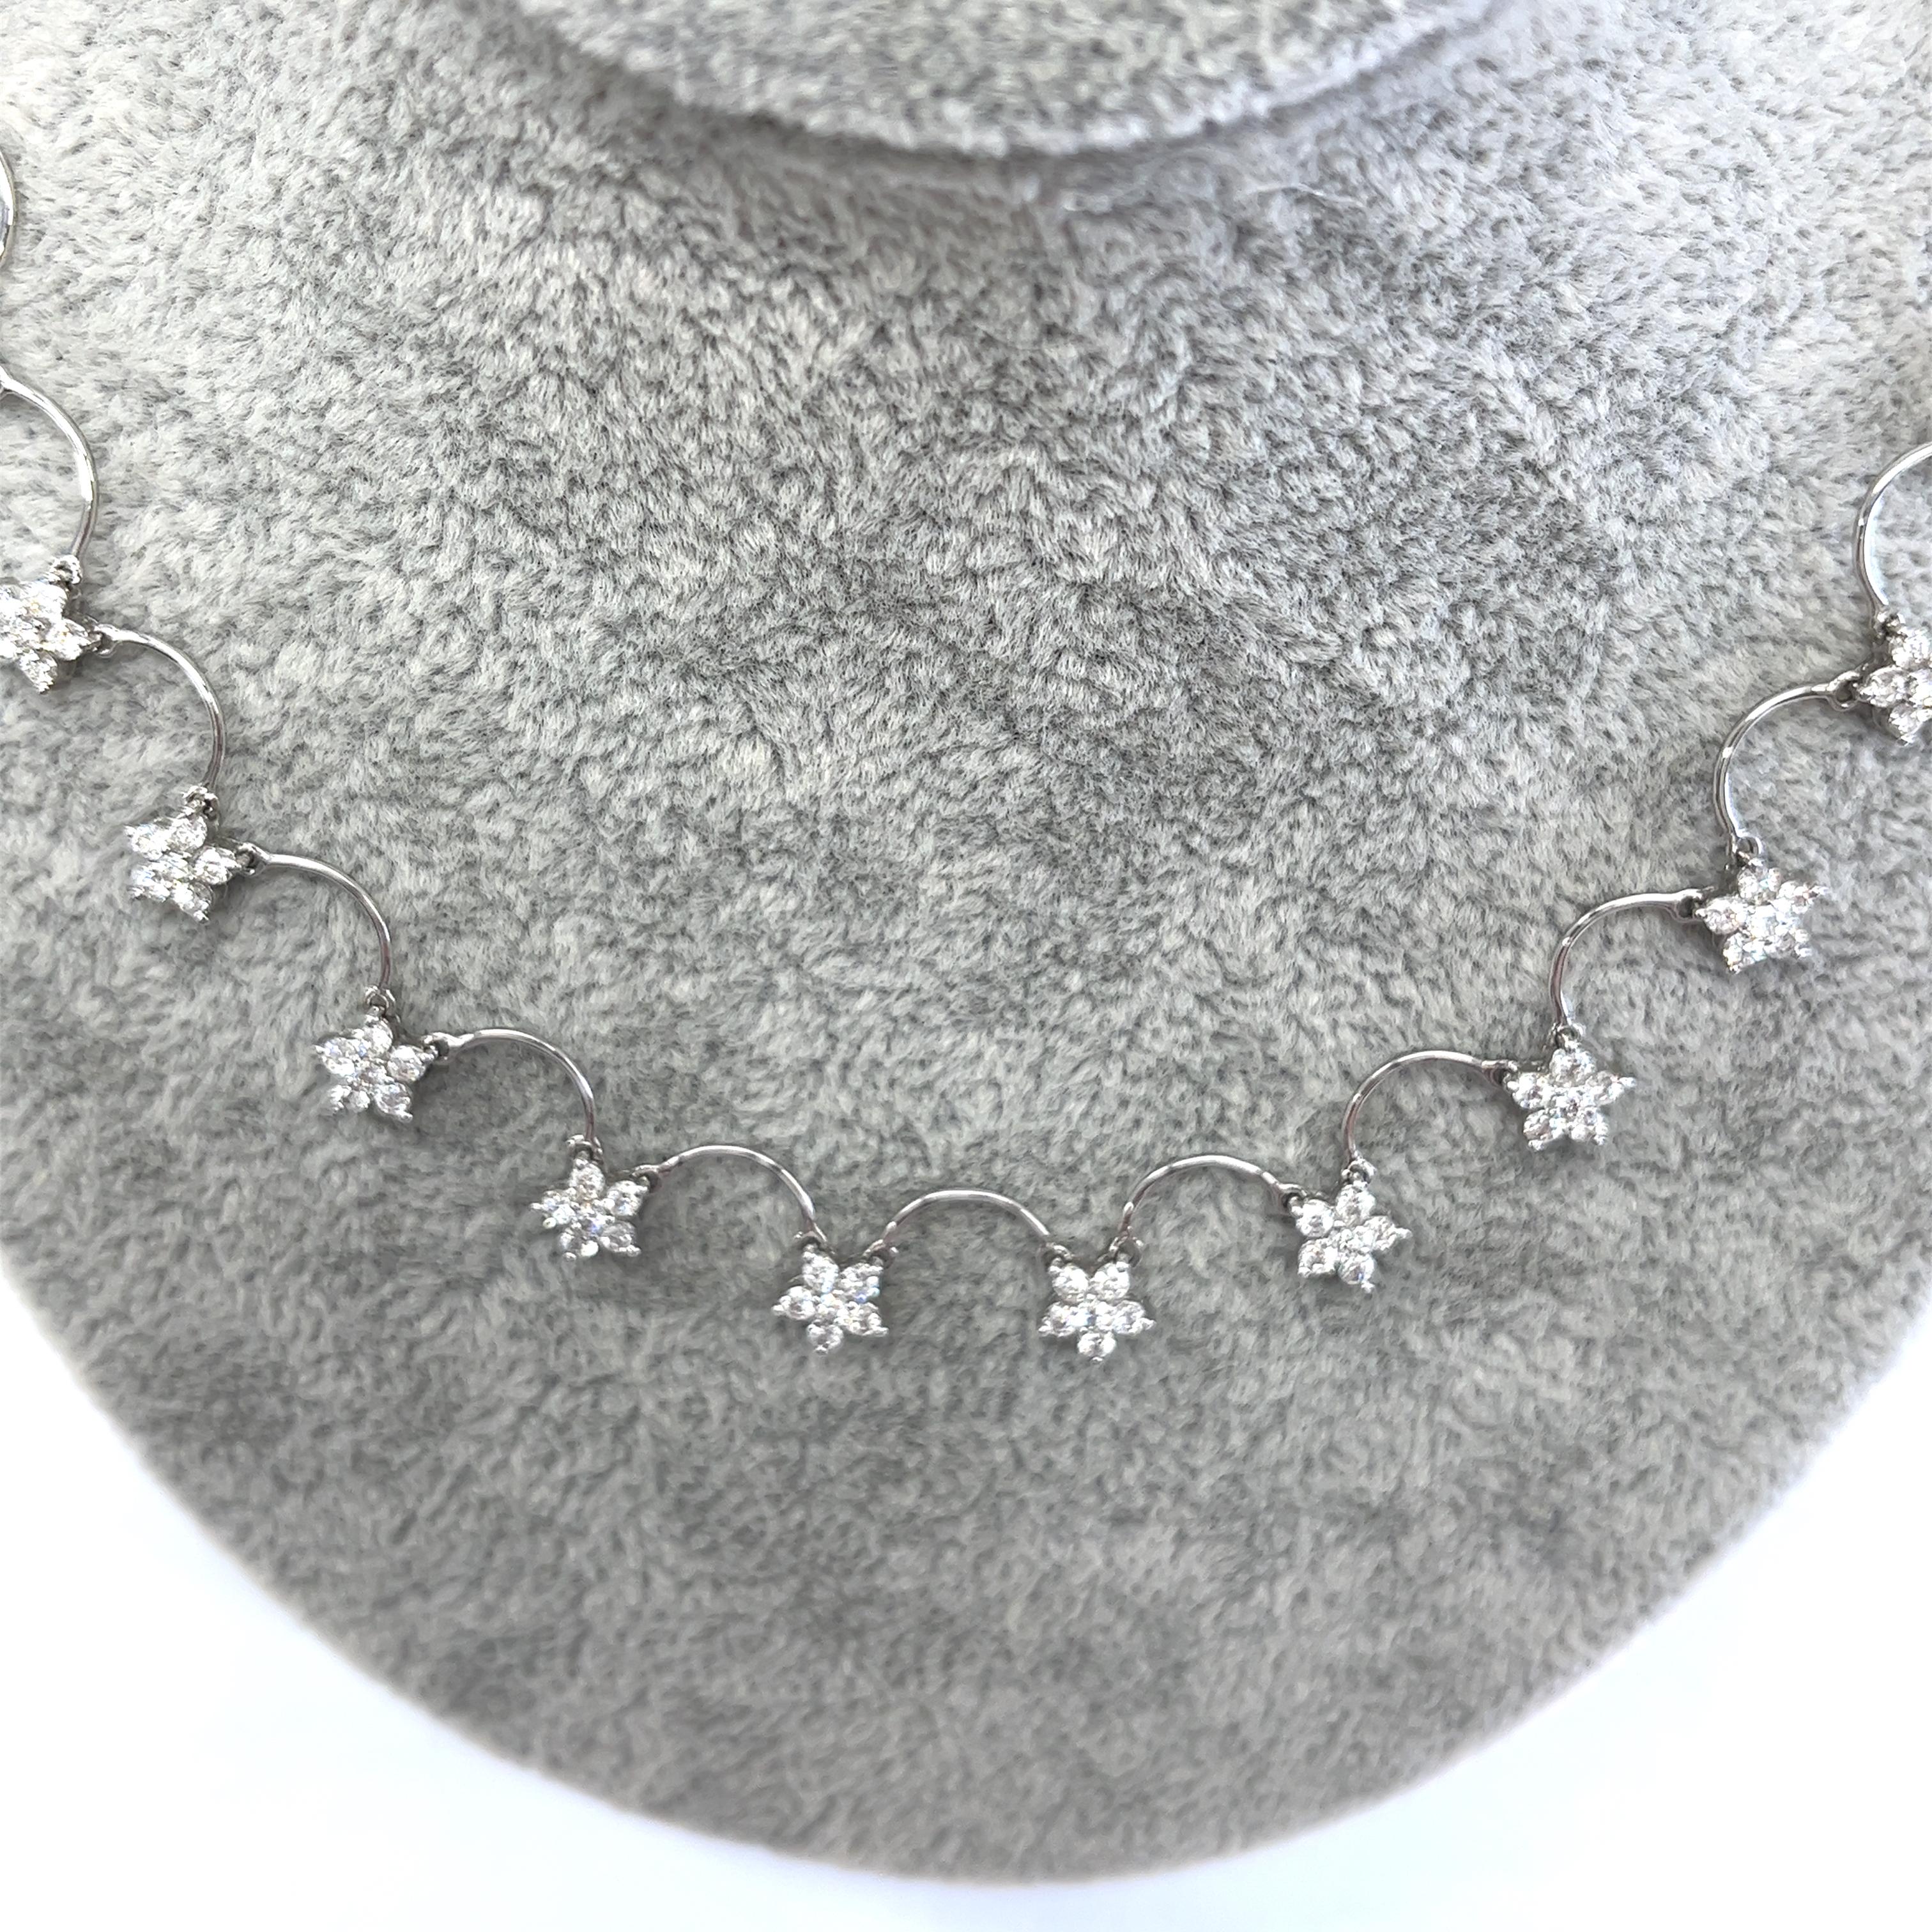 This necklace set features 2.0 natural round brilliant cut diamonds in cluster setting. The diamonds are set in 18ct white gold, and total length of the necklace is 17 inches. 
It is perfect for any occasion and is a great gift for a loved